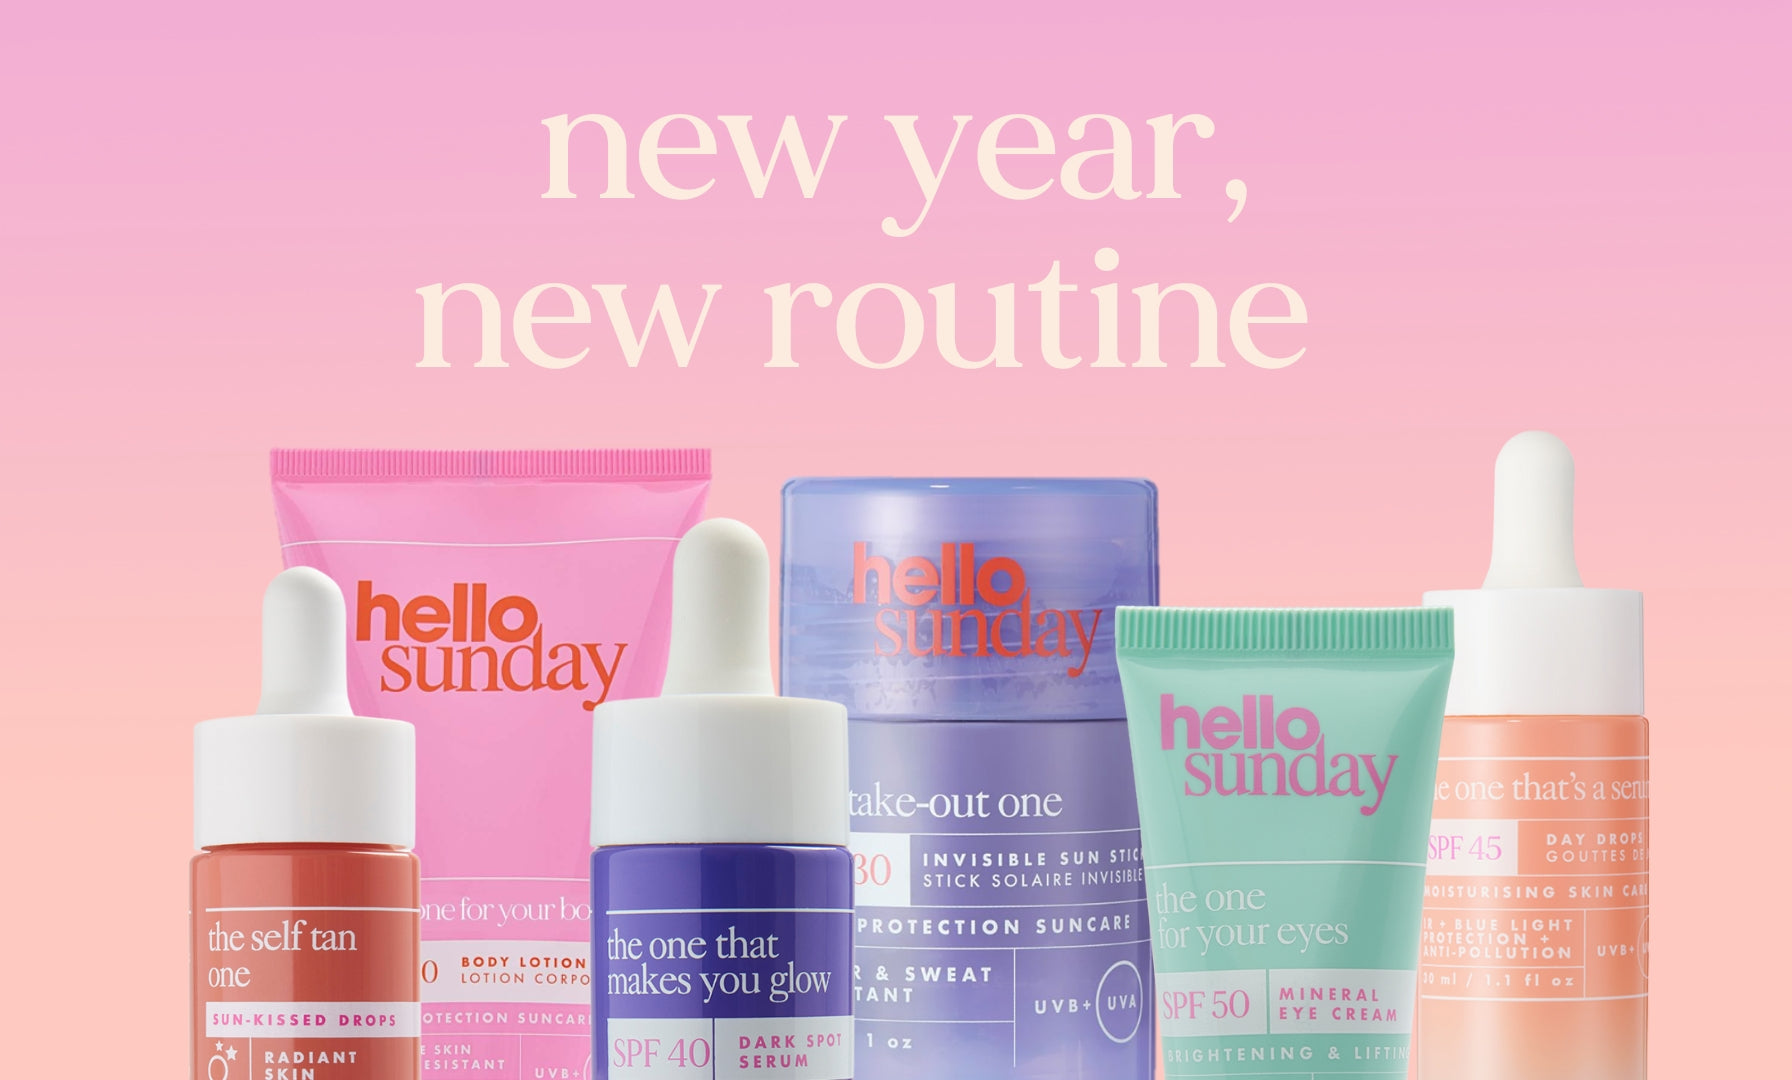 New year, new routine. We got you.